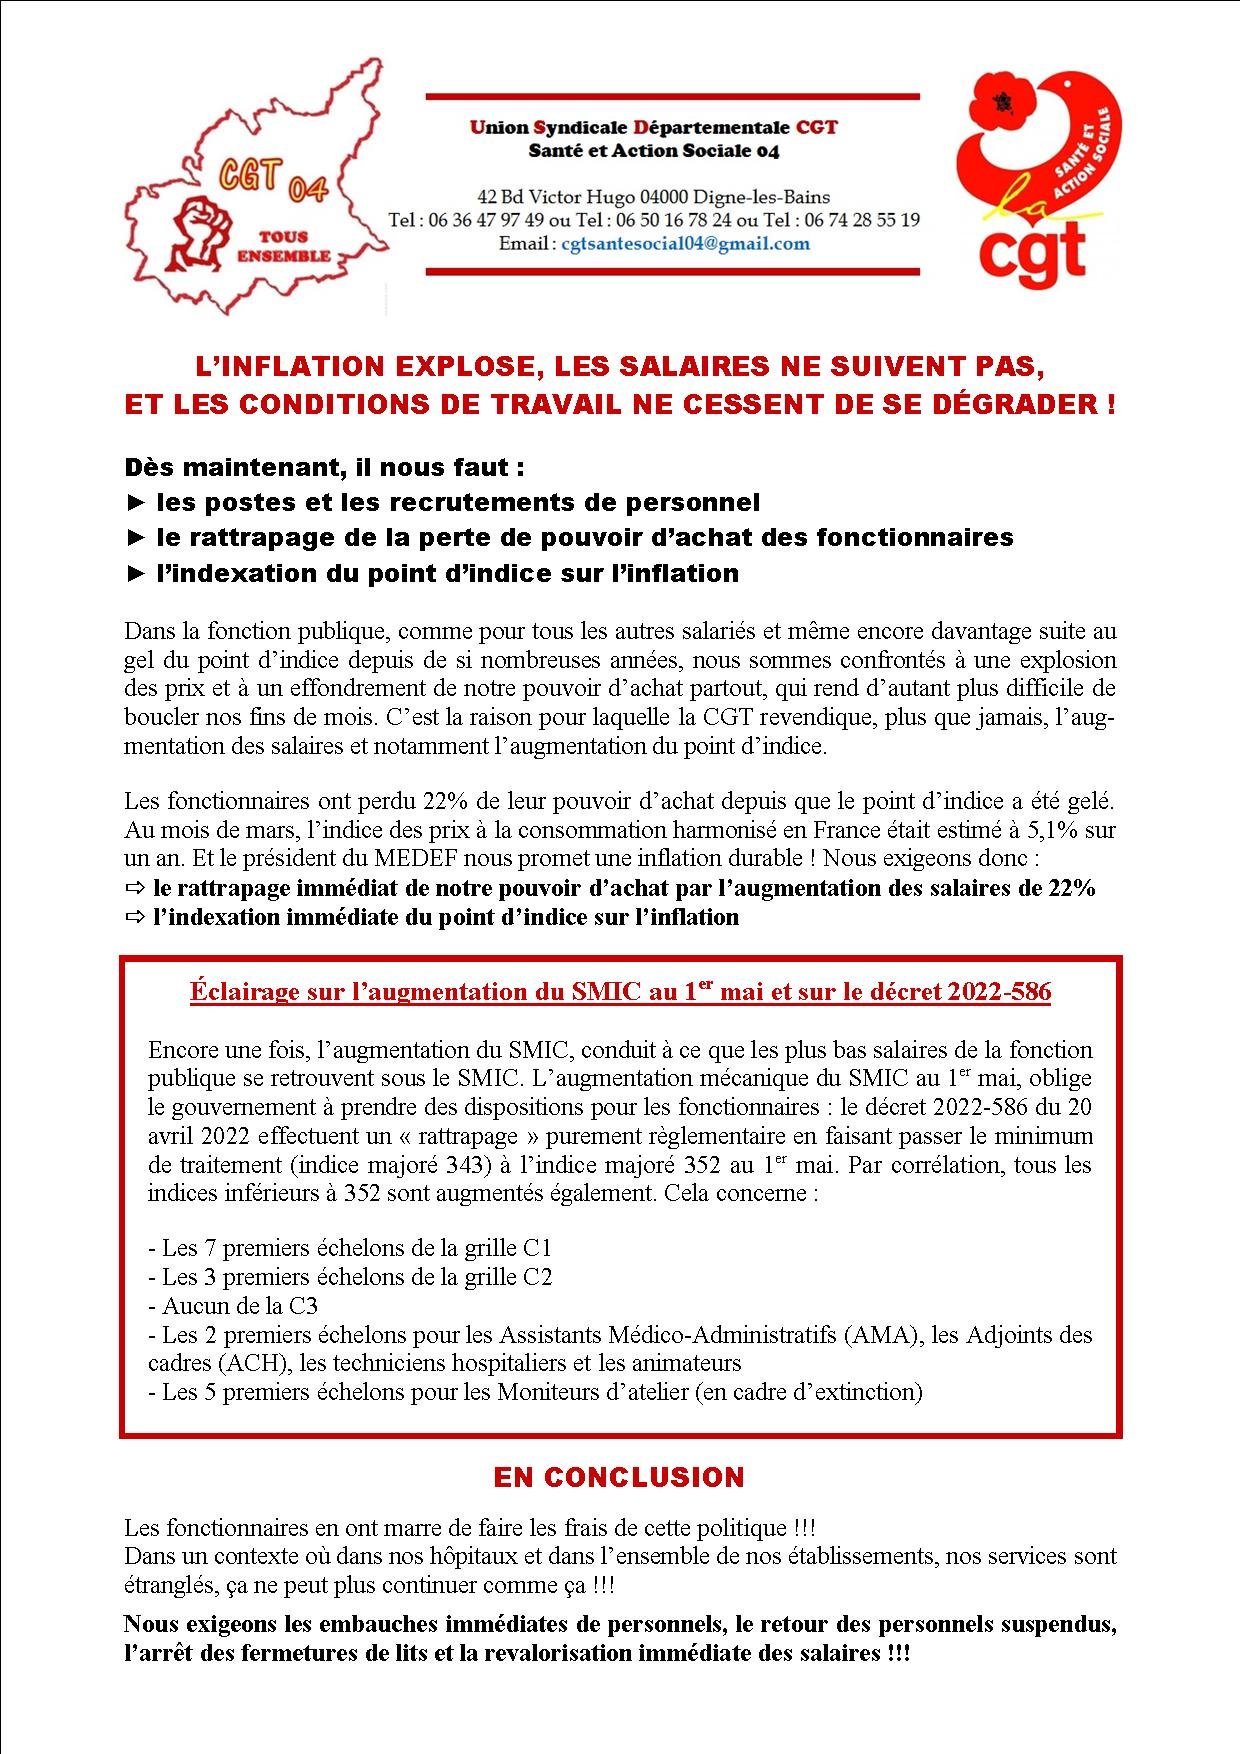 1399. Tract inflation salaire mai 2022